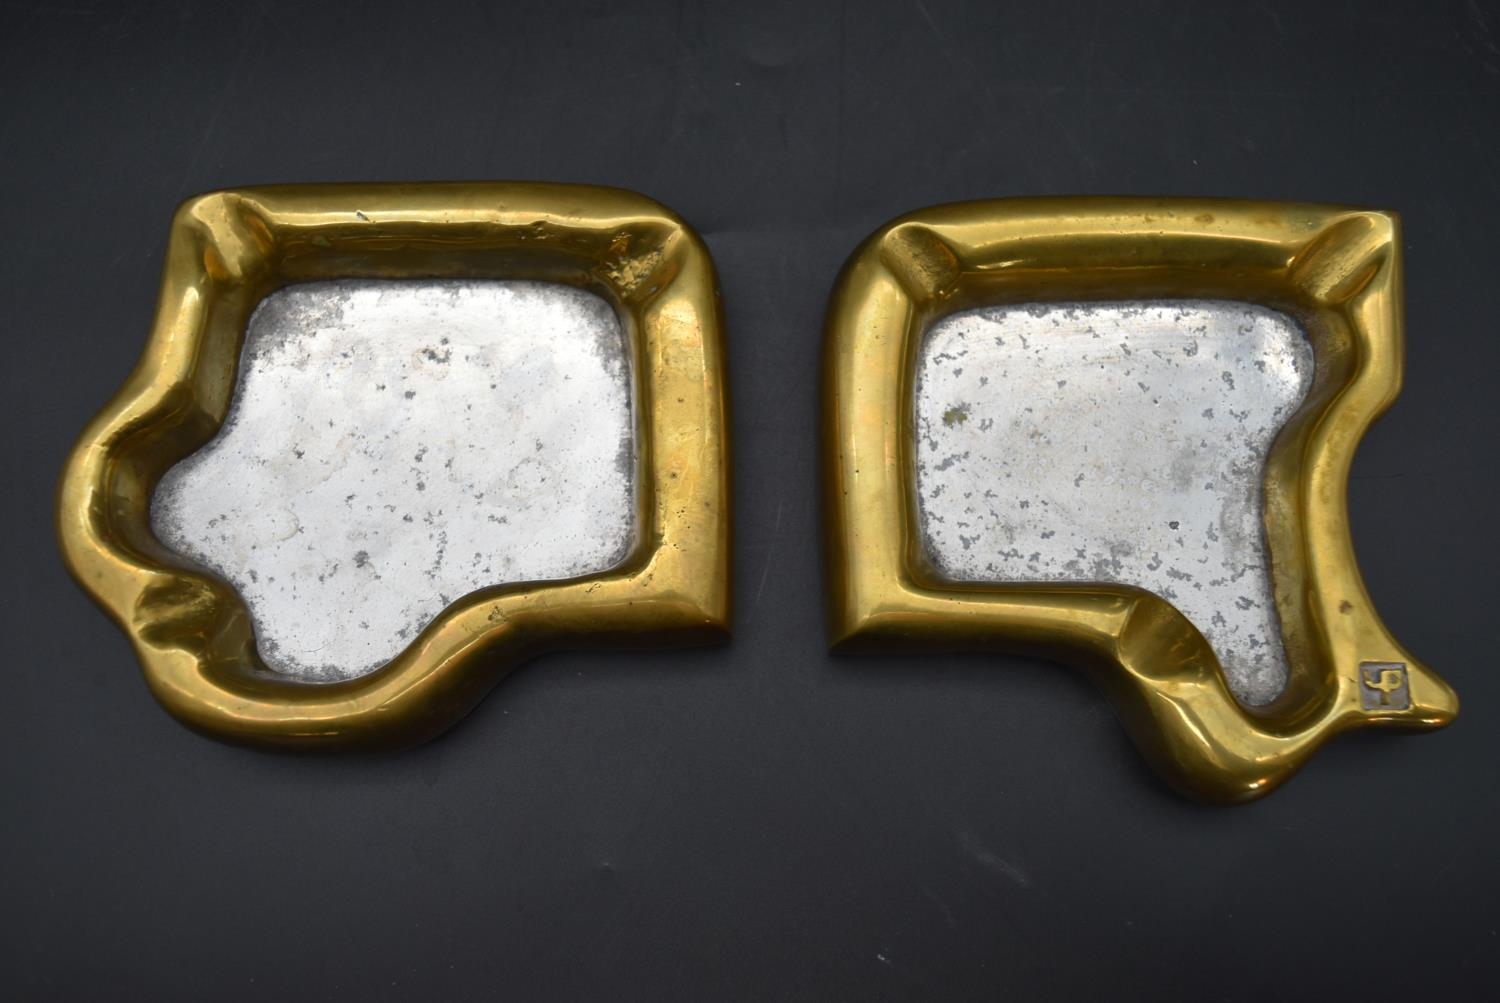 David Marshall - A set of four contemporary aluminium coasters with brass surround, handcrafted in a - Image 5 of 10